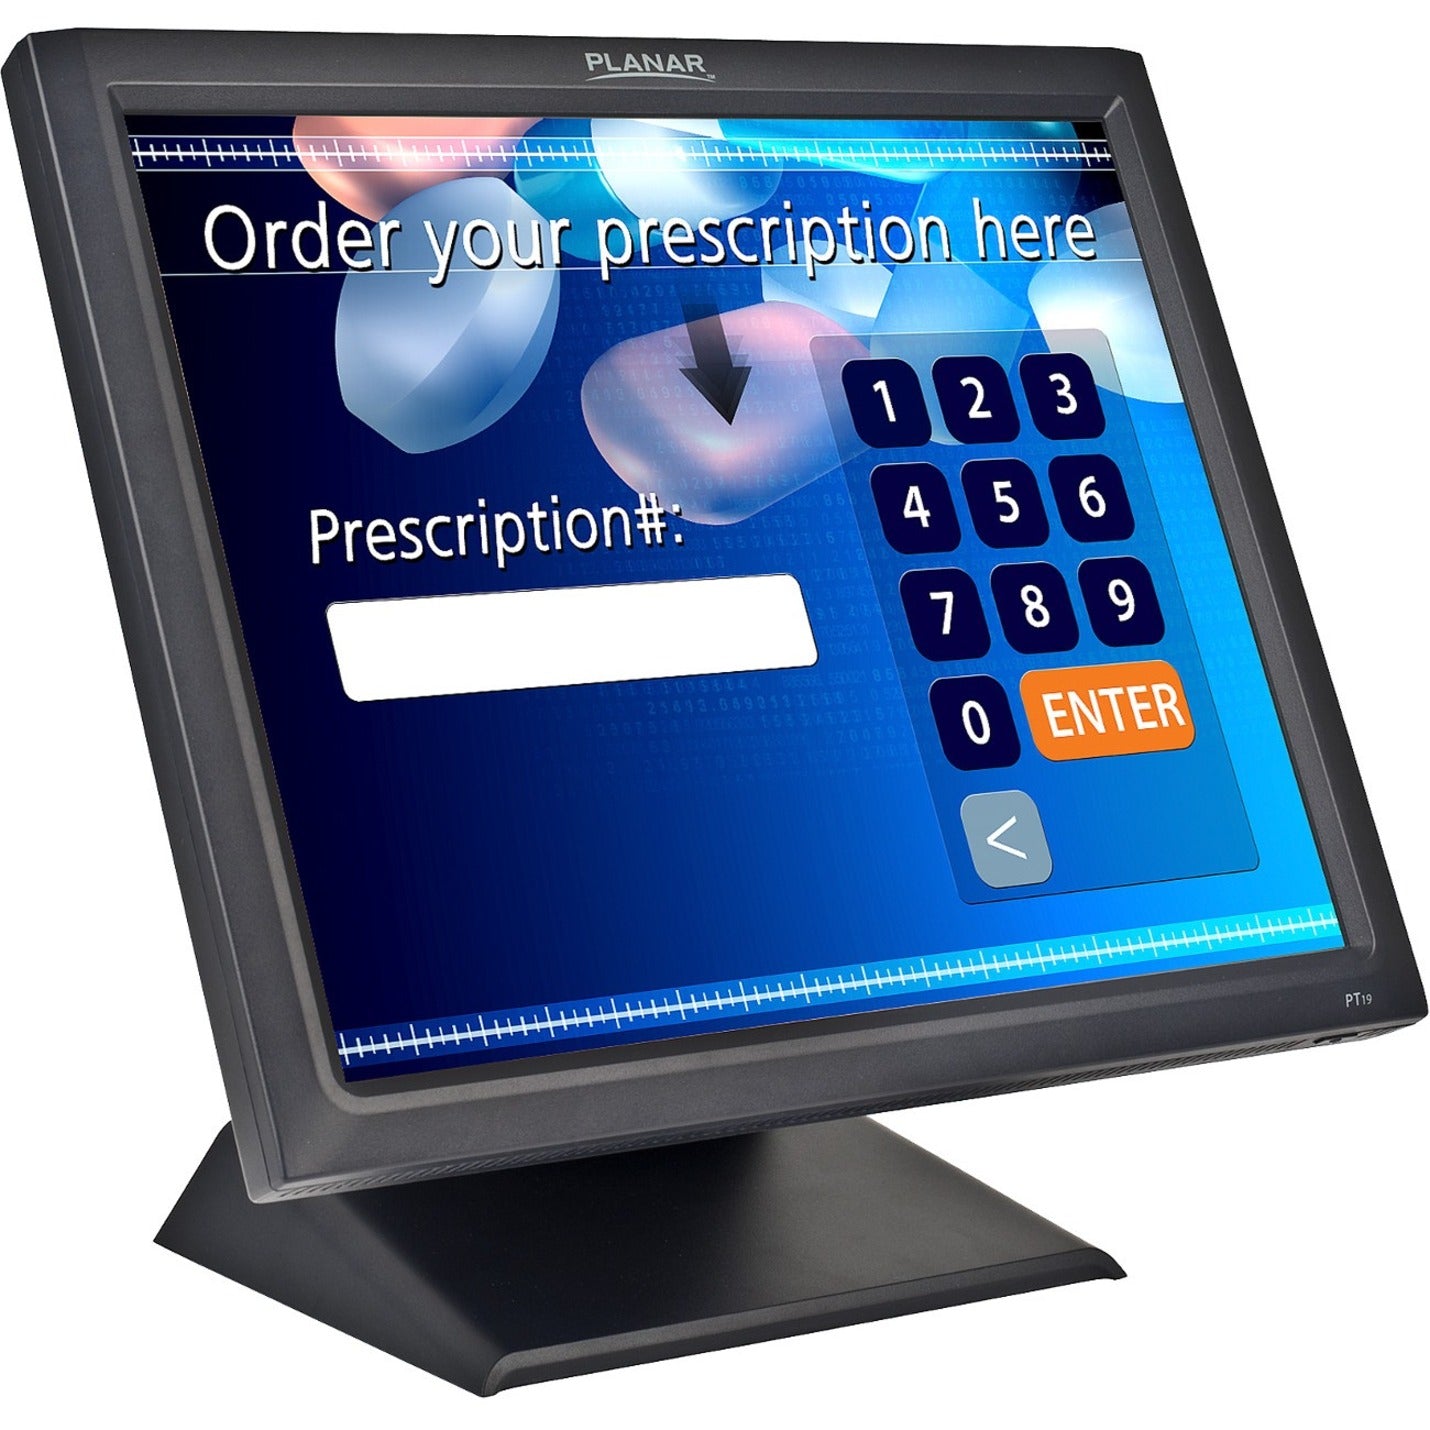 Planar 997-5971-01 PT1945R 19" Touch Screen Point of Sale Monitor, 5ms Response Time, 1280 x 1024 Resolution, HDMI, VGA, USB